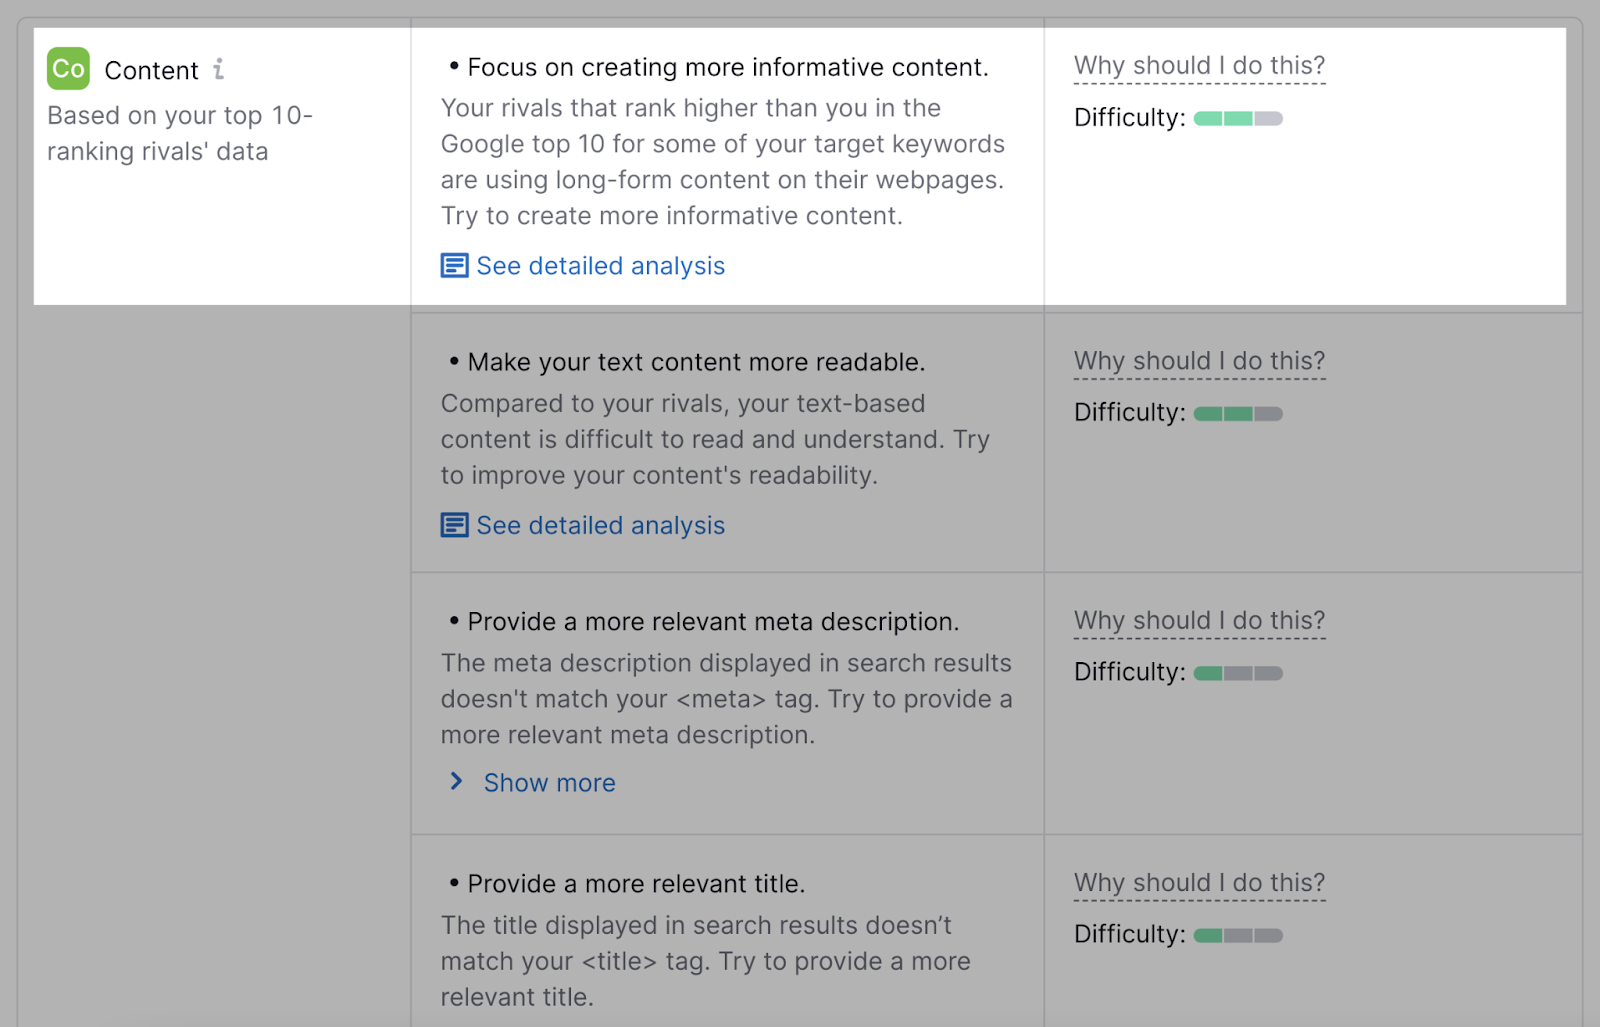 Content suggestions and based on your top 10 ranking rivals' data during the content audit